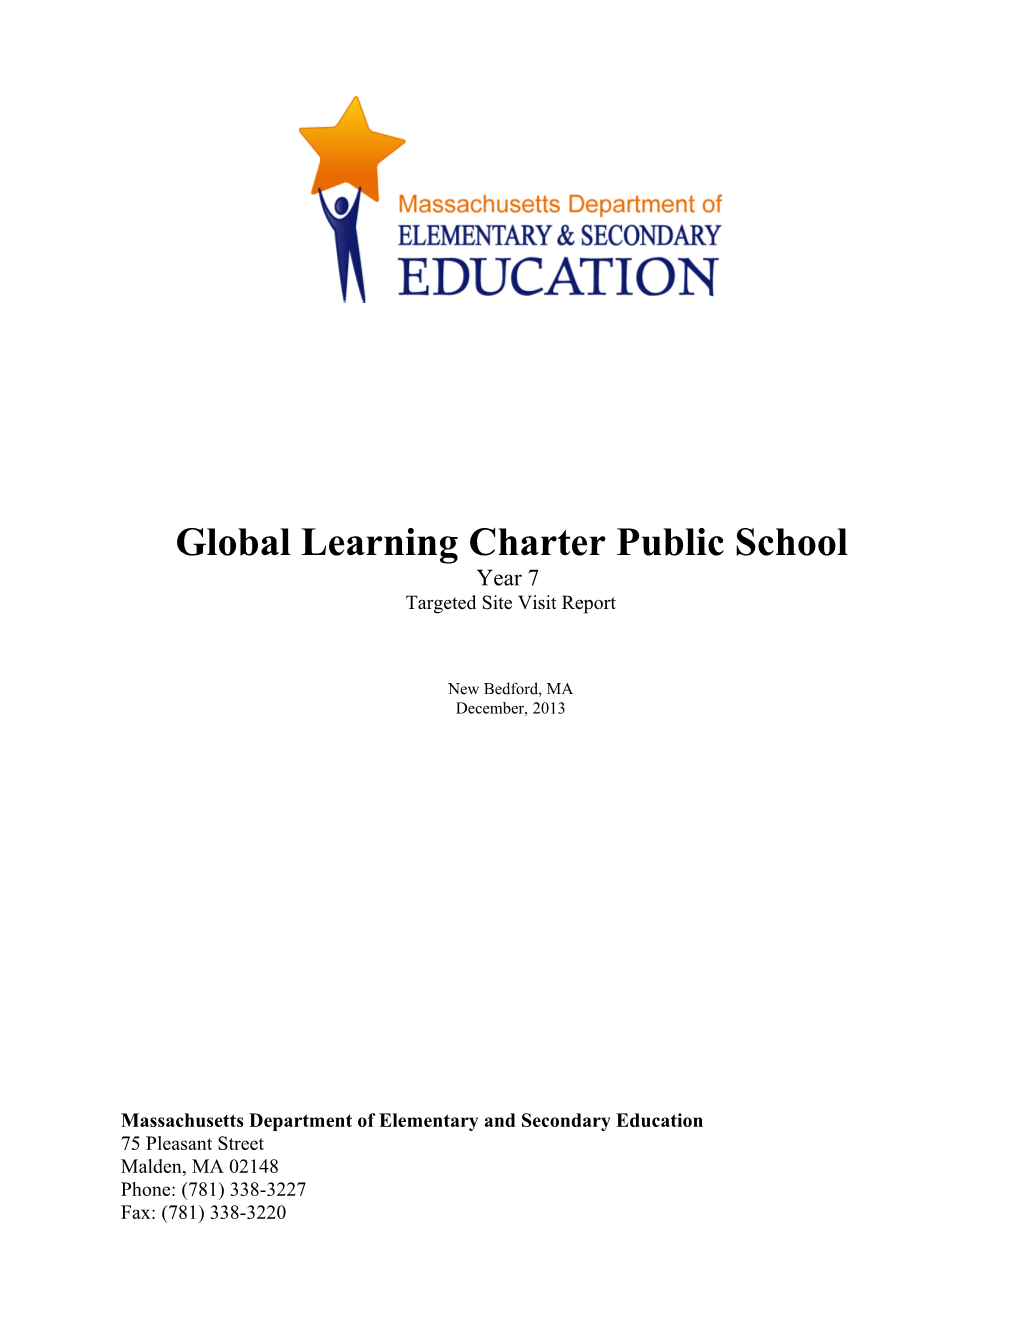 Global Learning Charter Public School Year 7 Site Visit Report